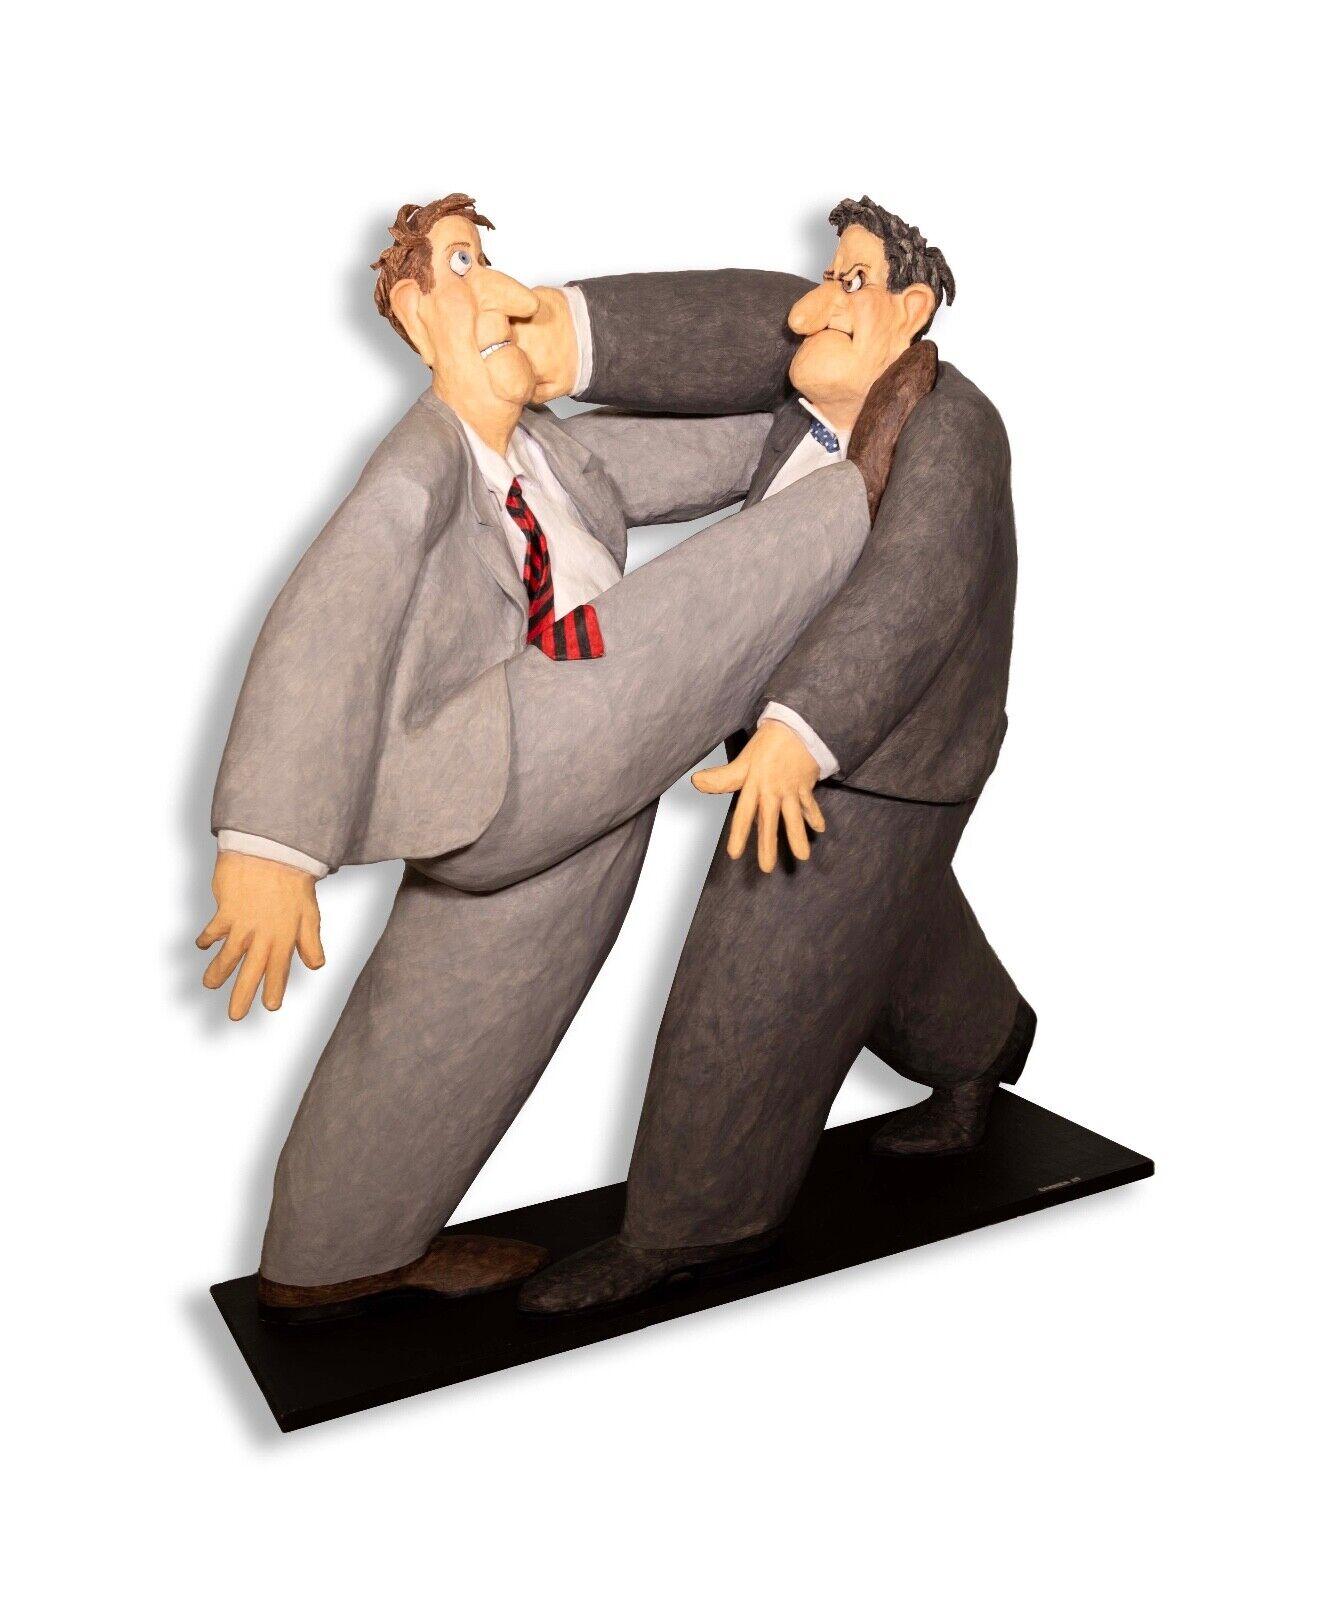 An amusing and humorous papier mache sculpture depicting two business men expressively fighting titled 